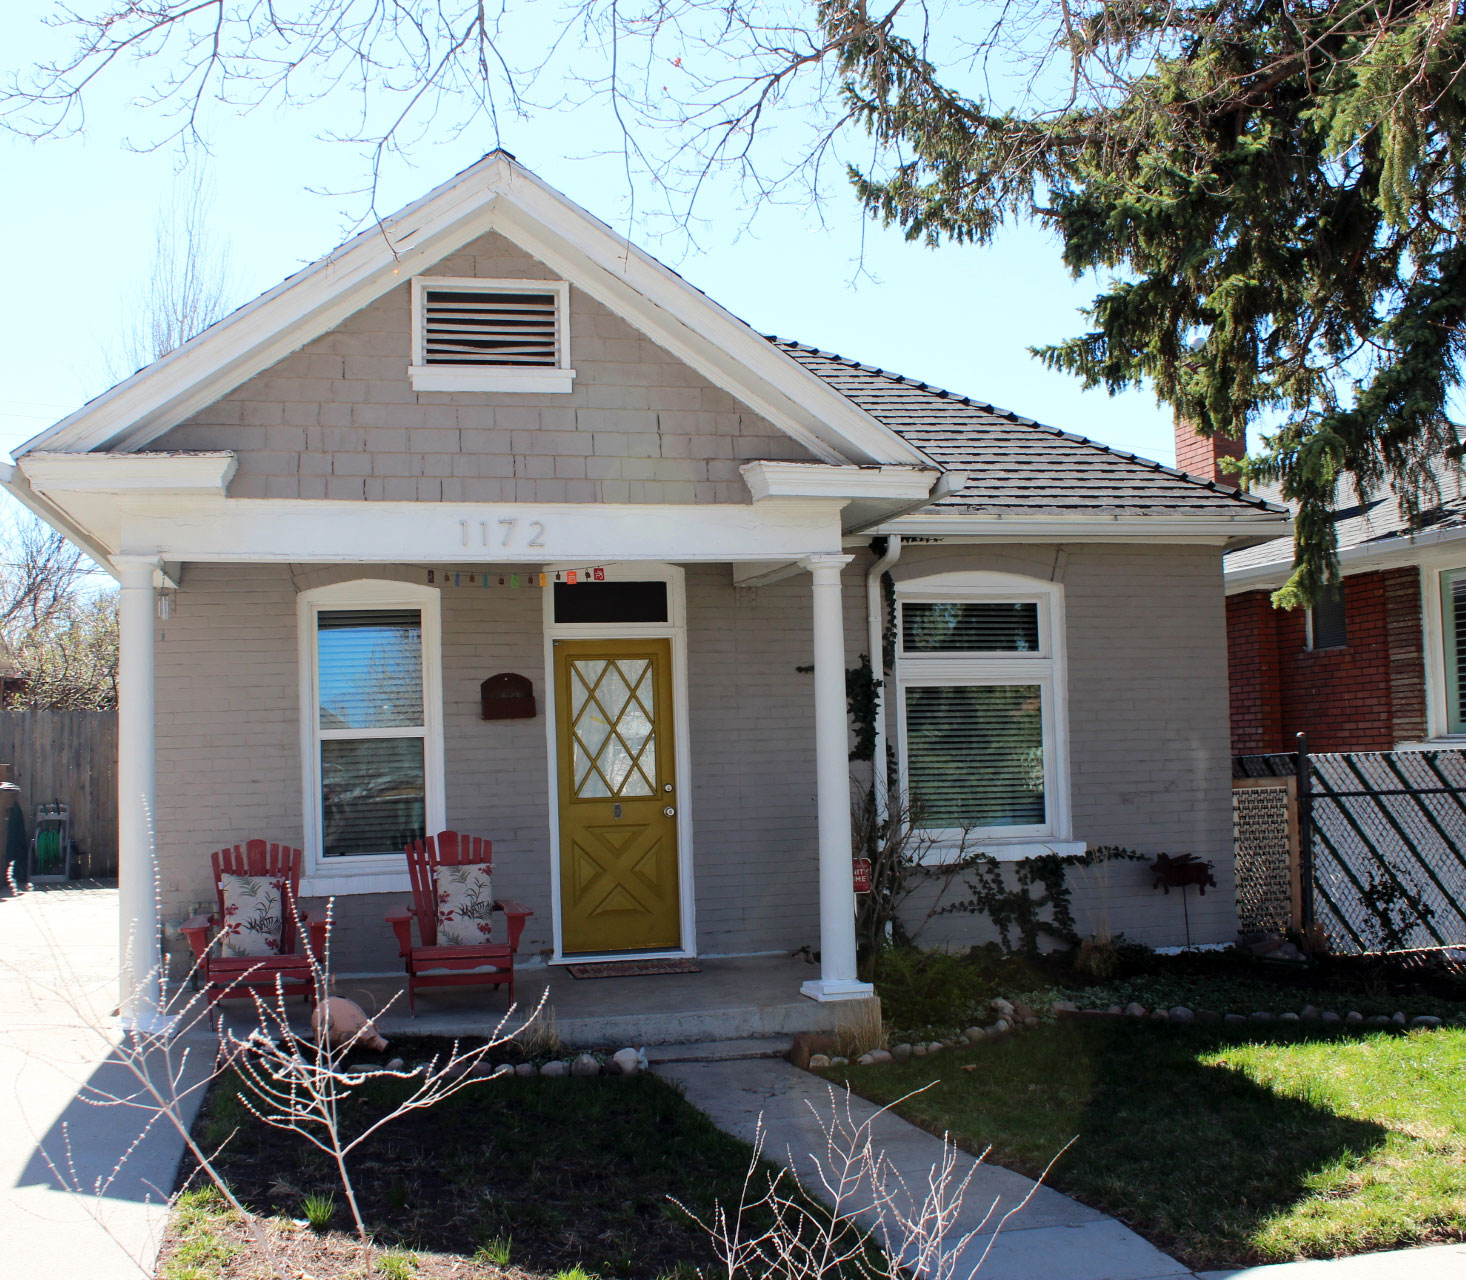 Front of Home 1172 E Bryan Ave, Salt Lake City, 84105